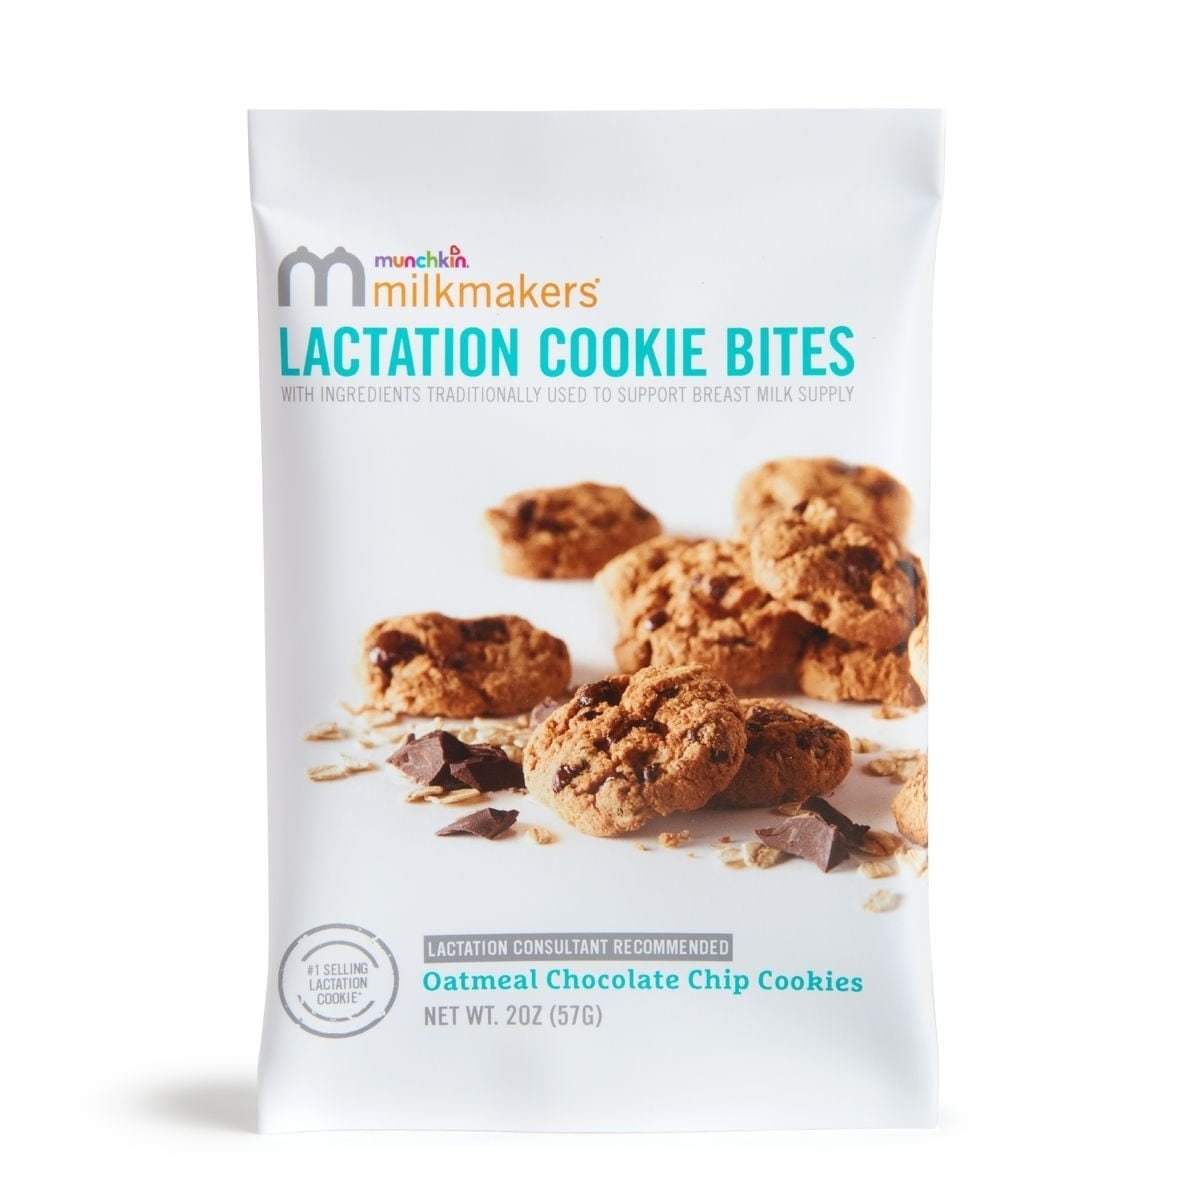 Milkmakers Chocolate Chip Lactation Cookie Bites